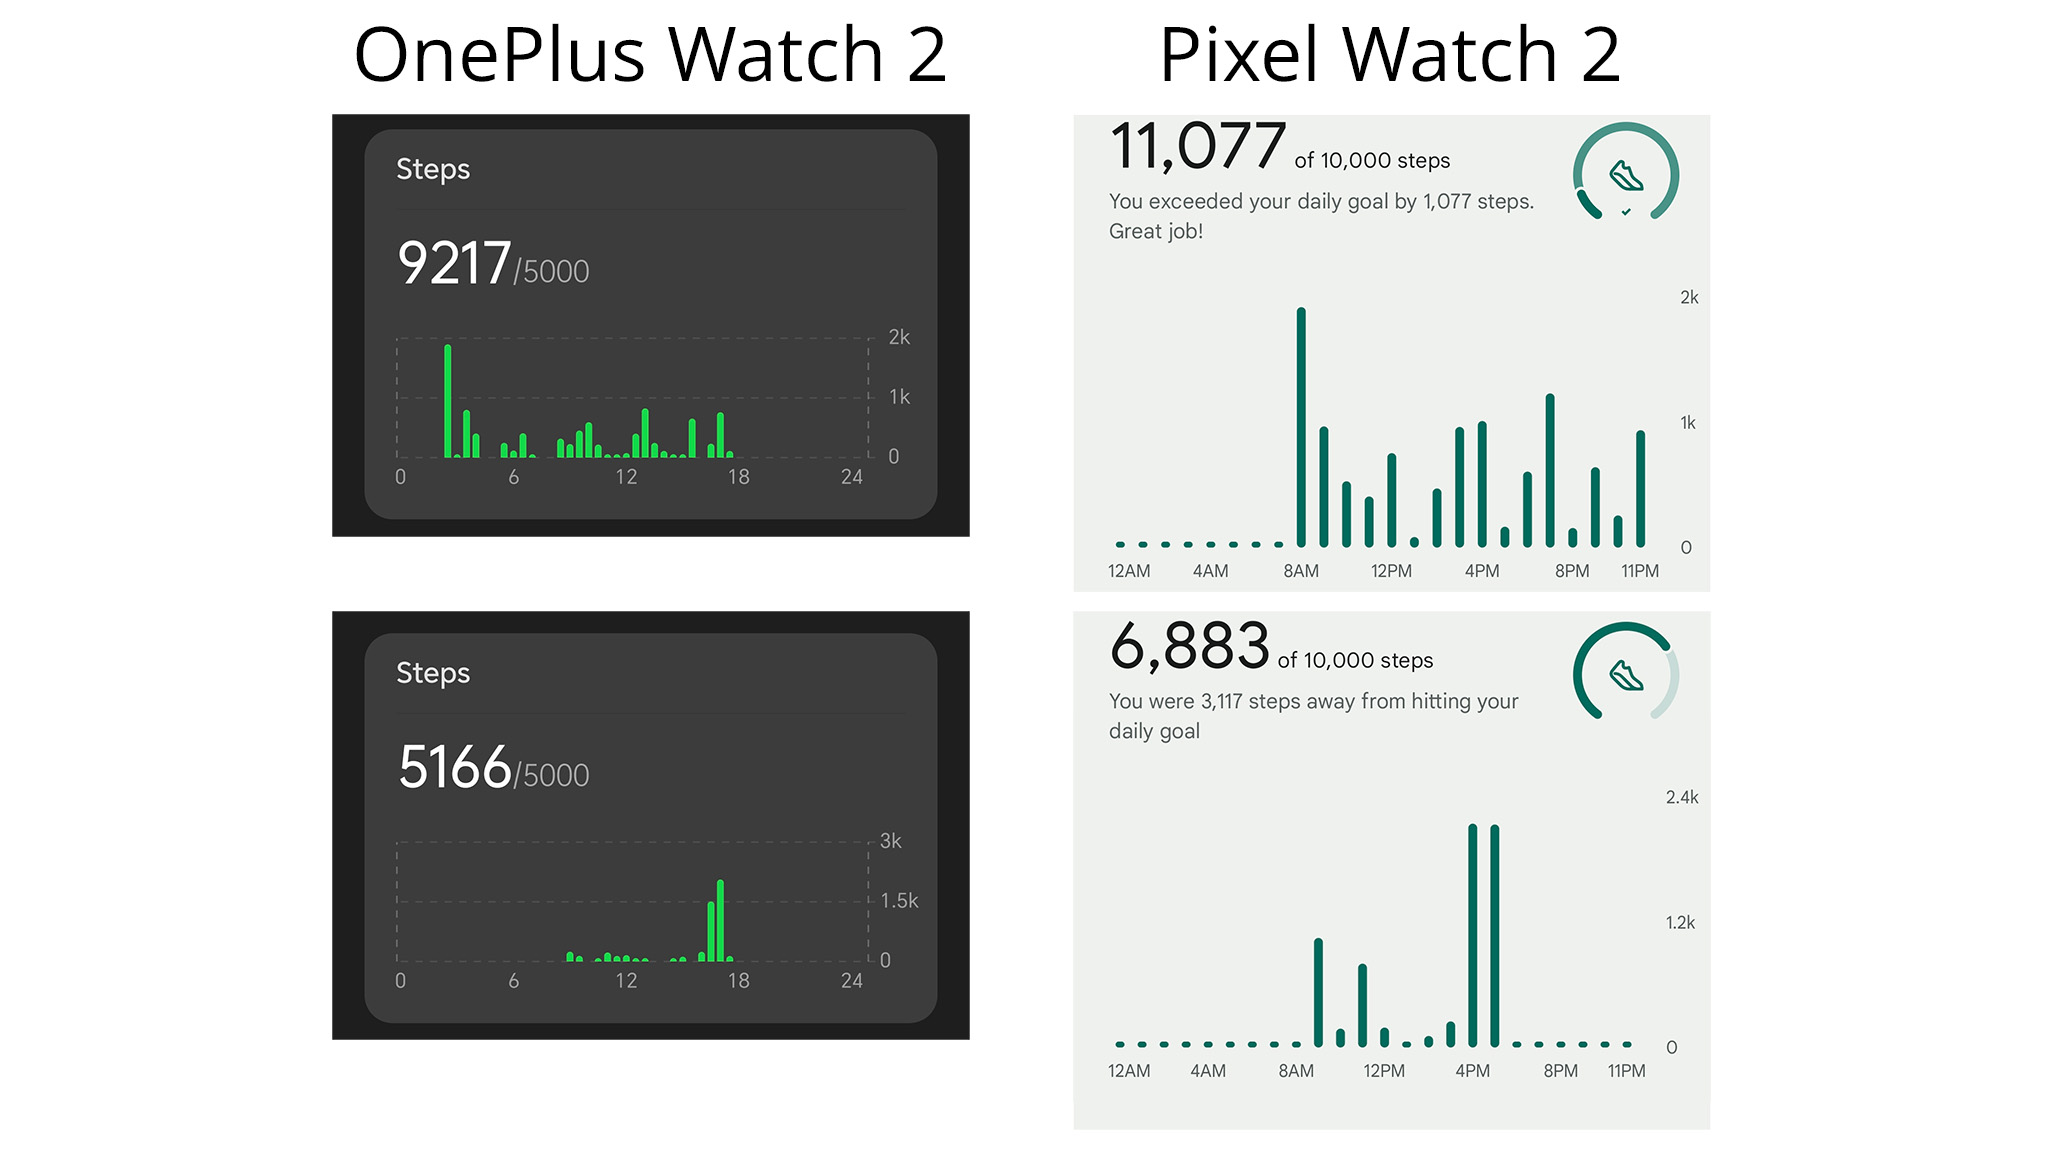 Comparing step counts between the OnePlus Watch 2 and Google Pixel Watch 2